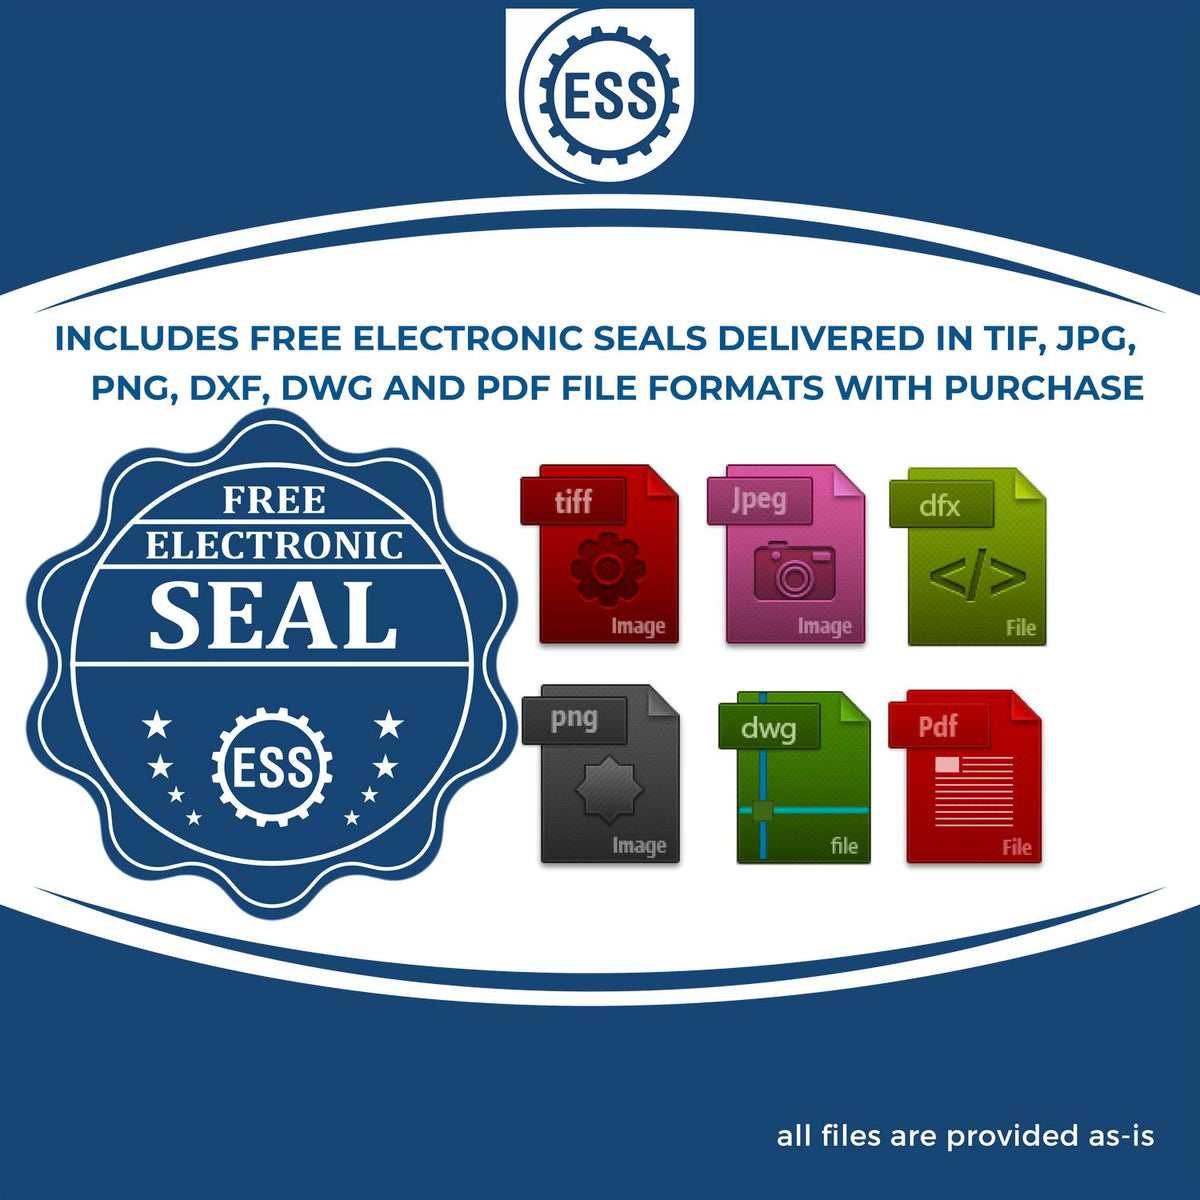 An infographic for the free electronic seal for the Long Reach Arkansas PE Seal illustrating the different file type icons such as DXF, DWG, TIF, JPG and PNG.